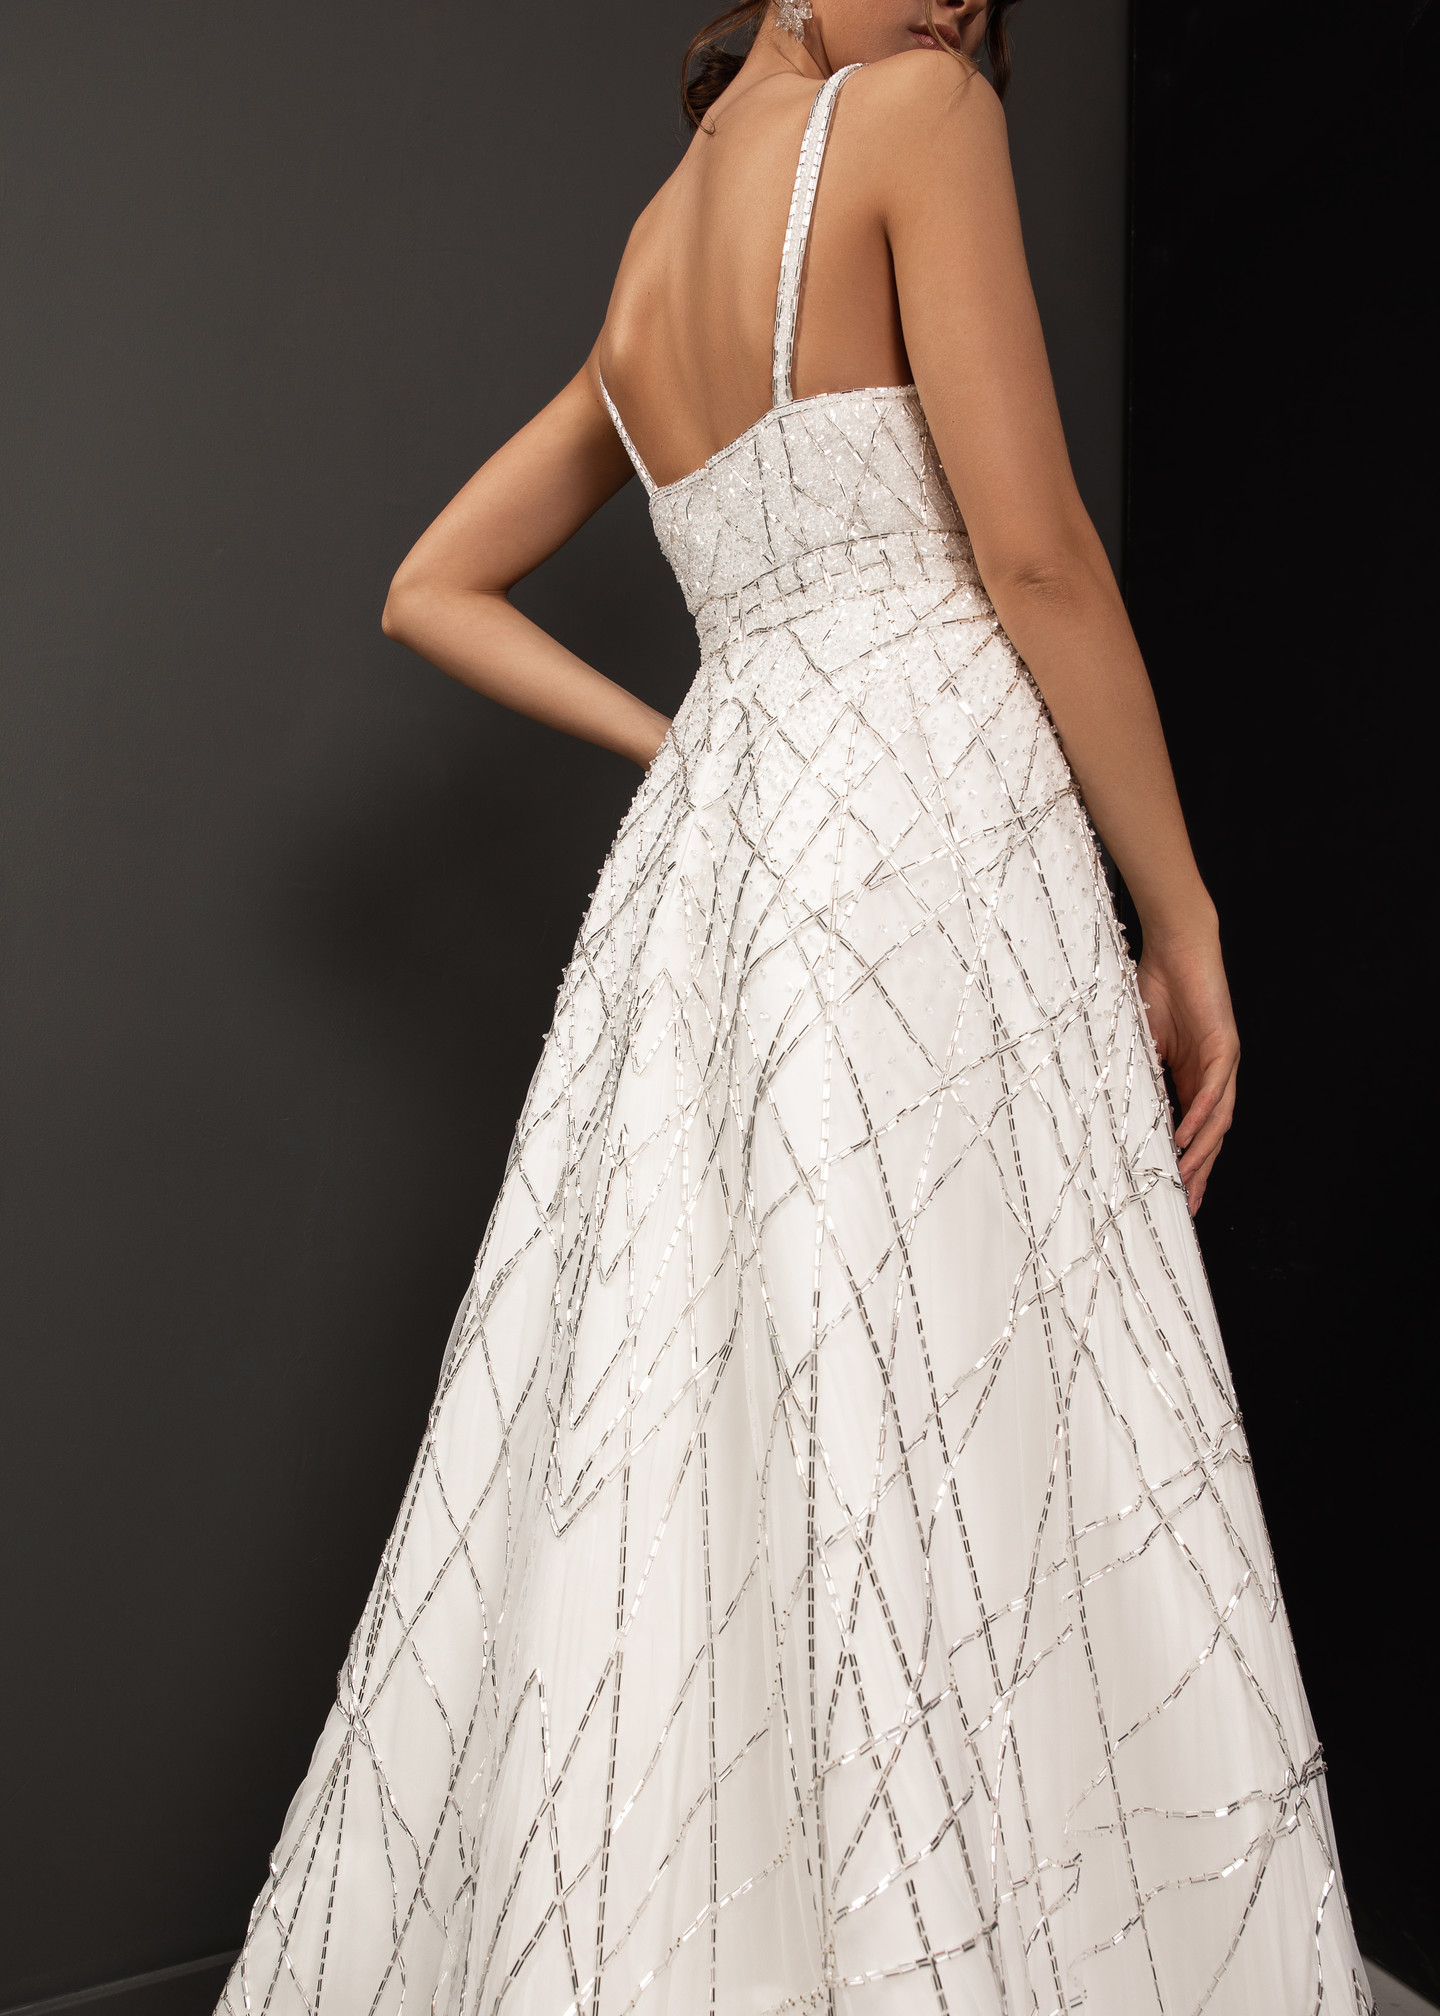 Tiyana dress, 2021, couture, dress, bridal, off-white, embroidery, A-line, train